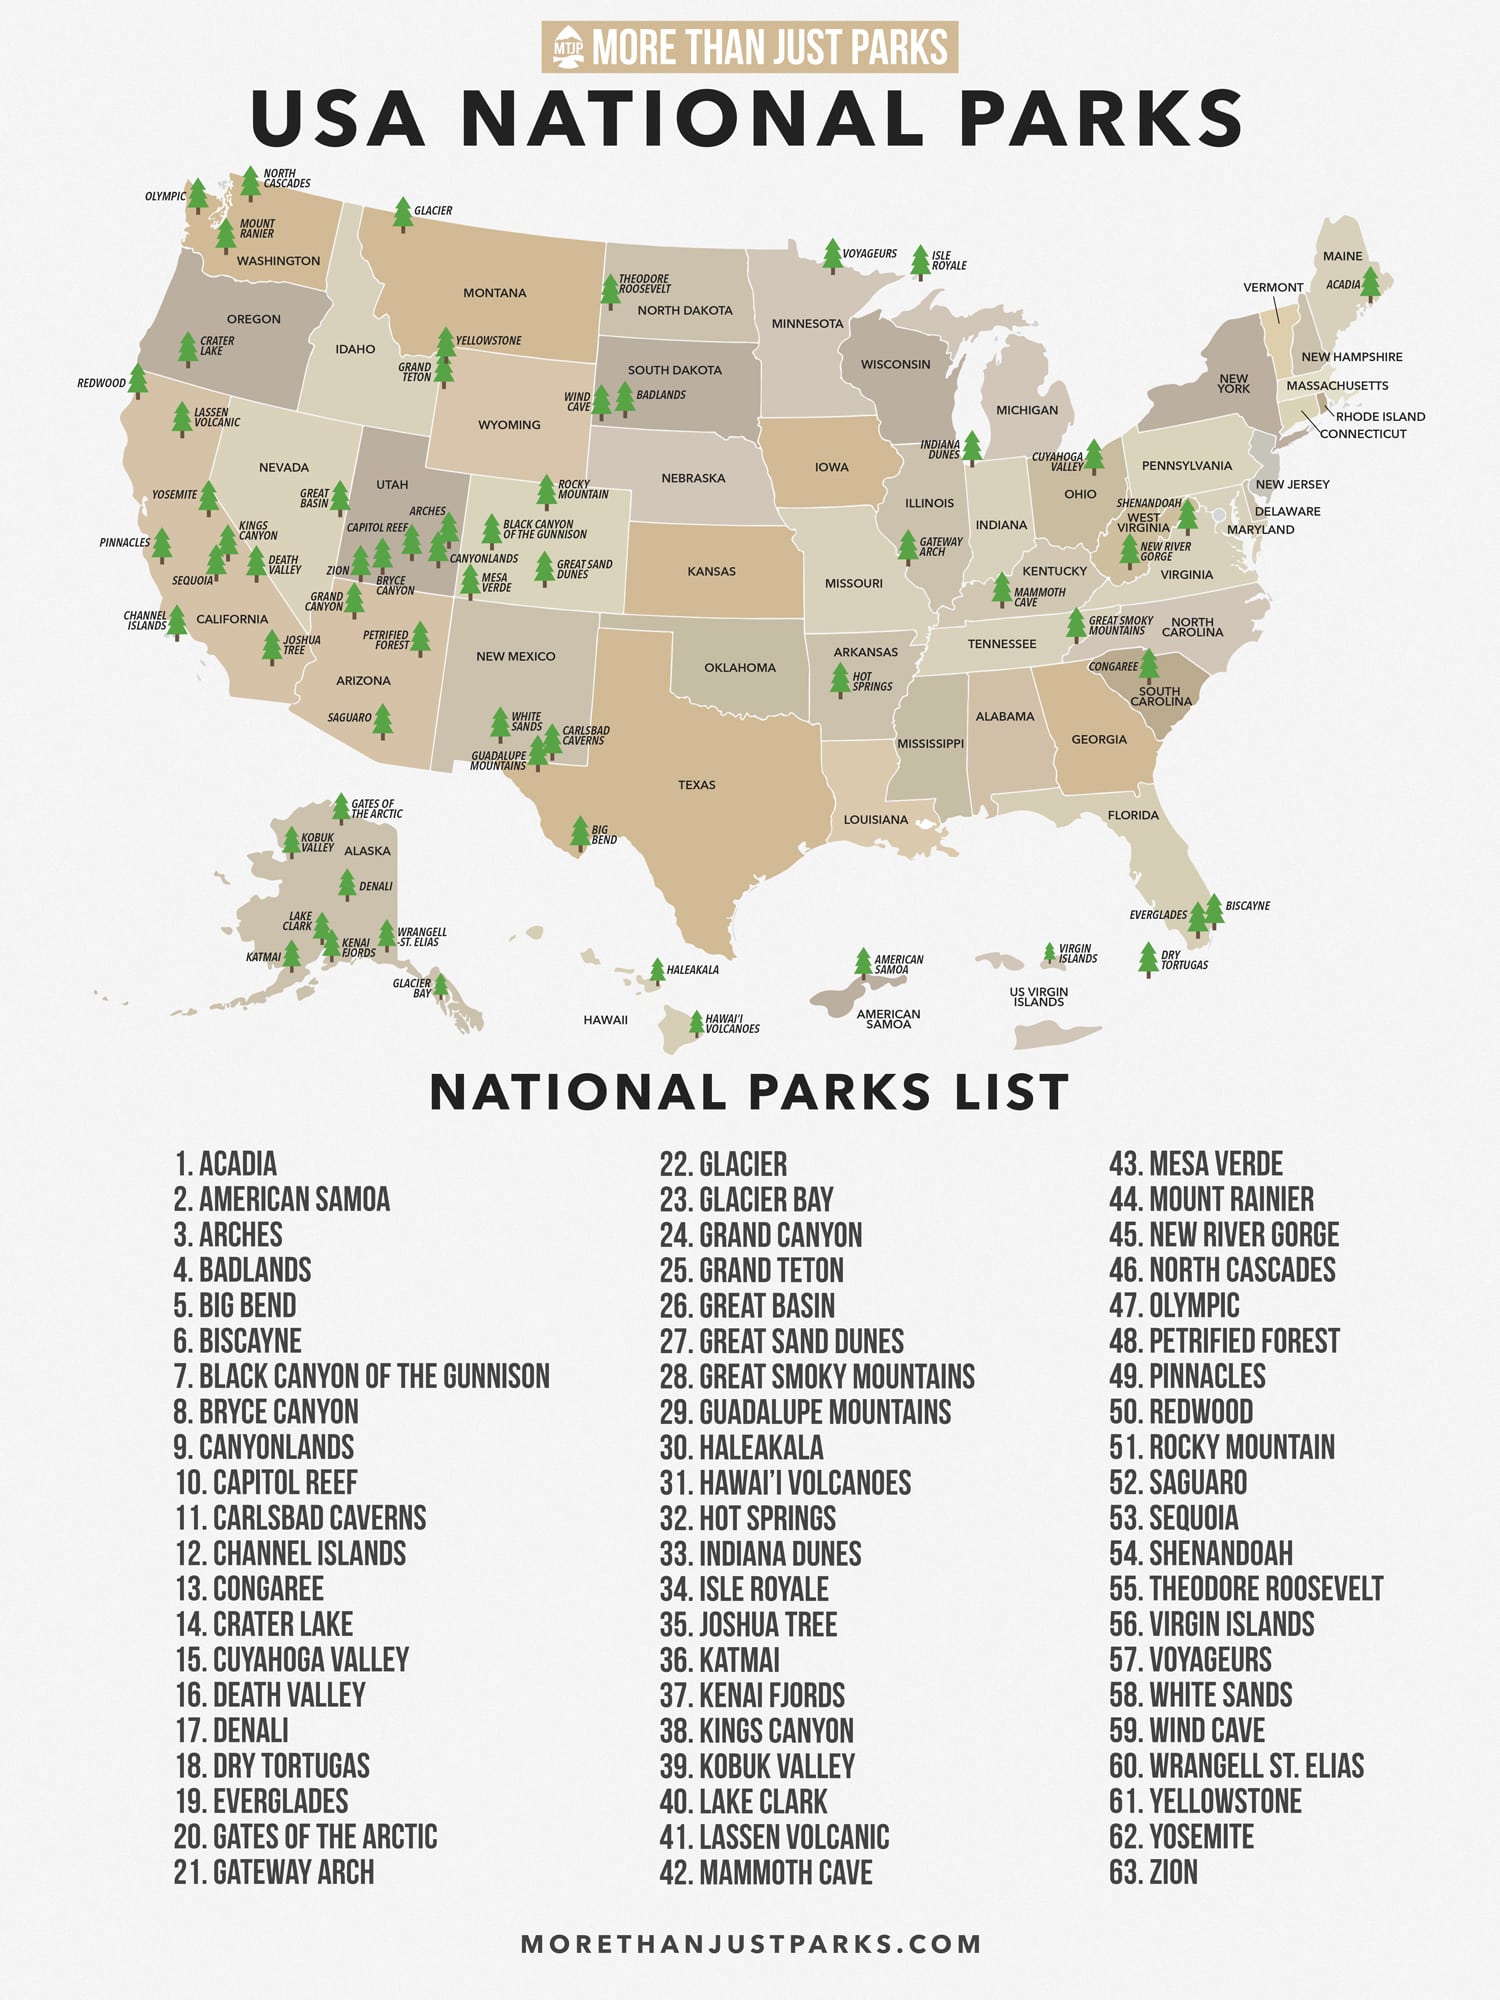 List of National Parks by State (+ Printable National Parks MAP)